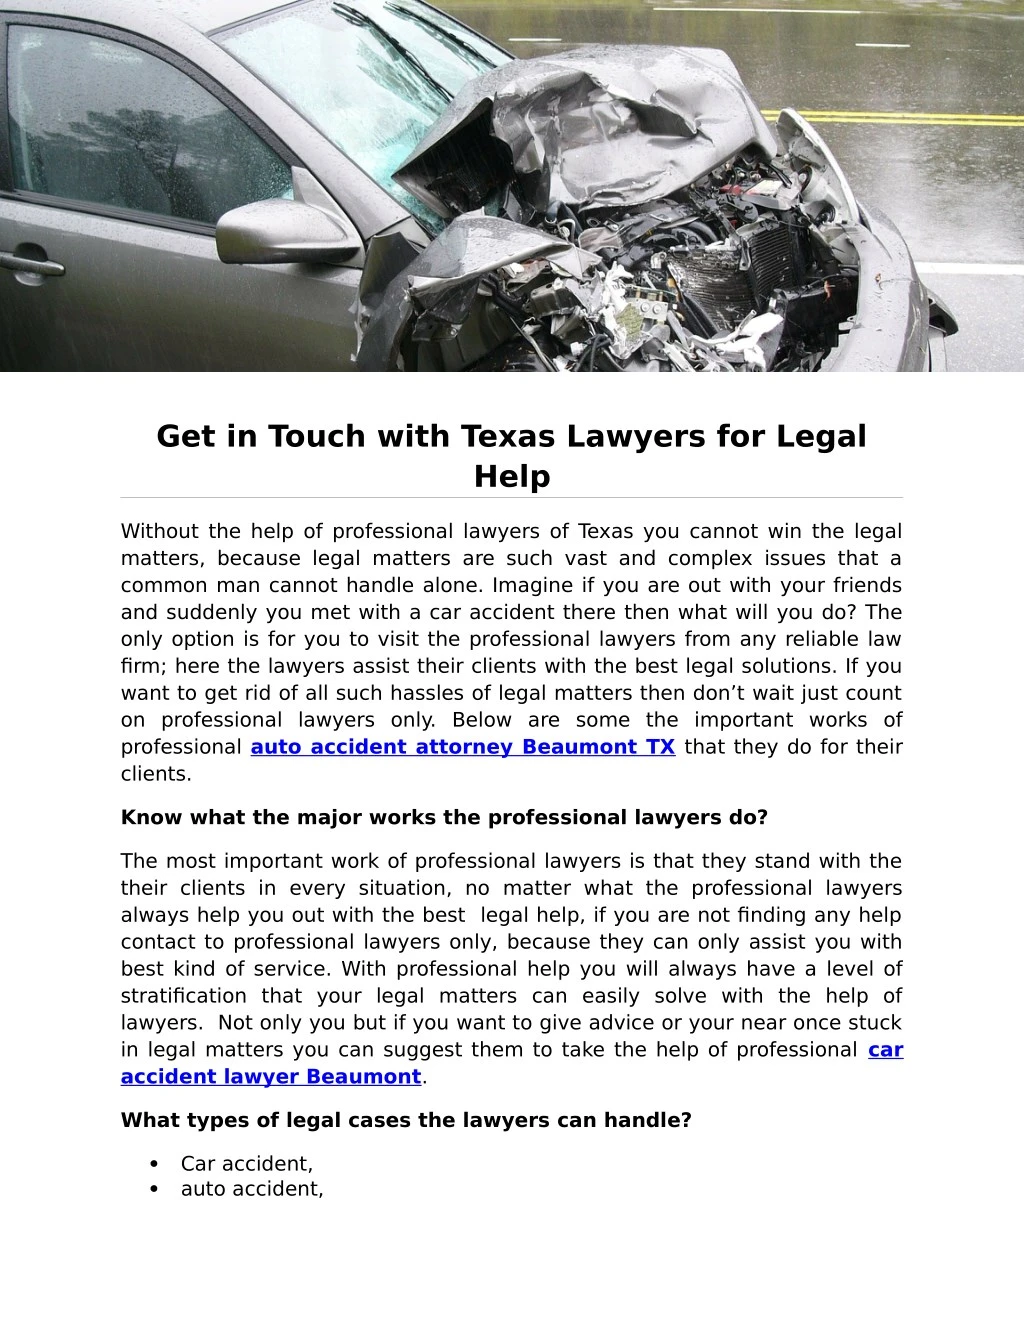 get in touch with texas lawyers for legal help